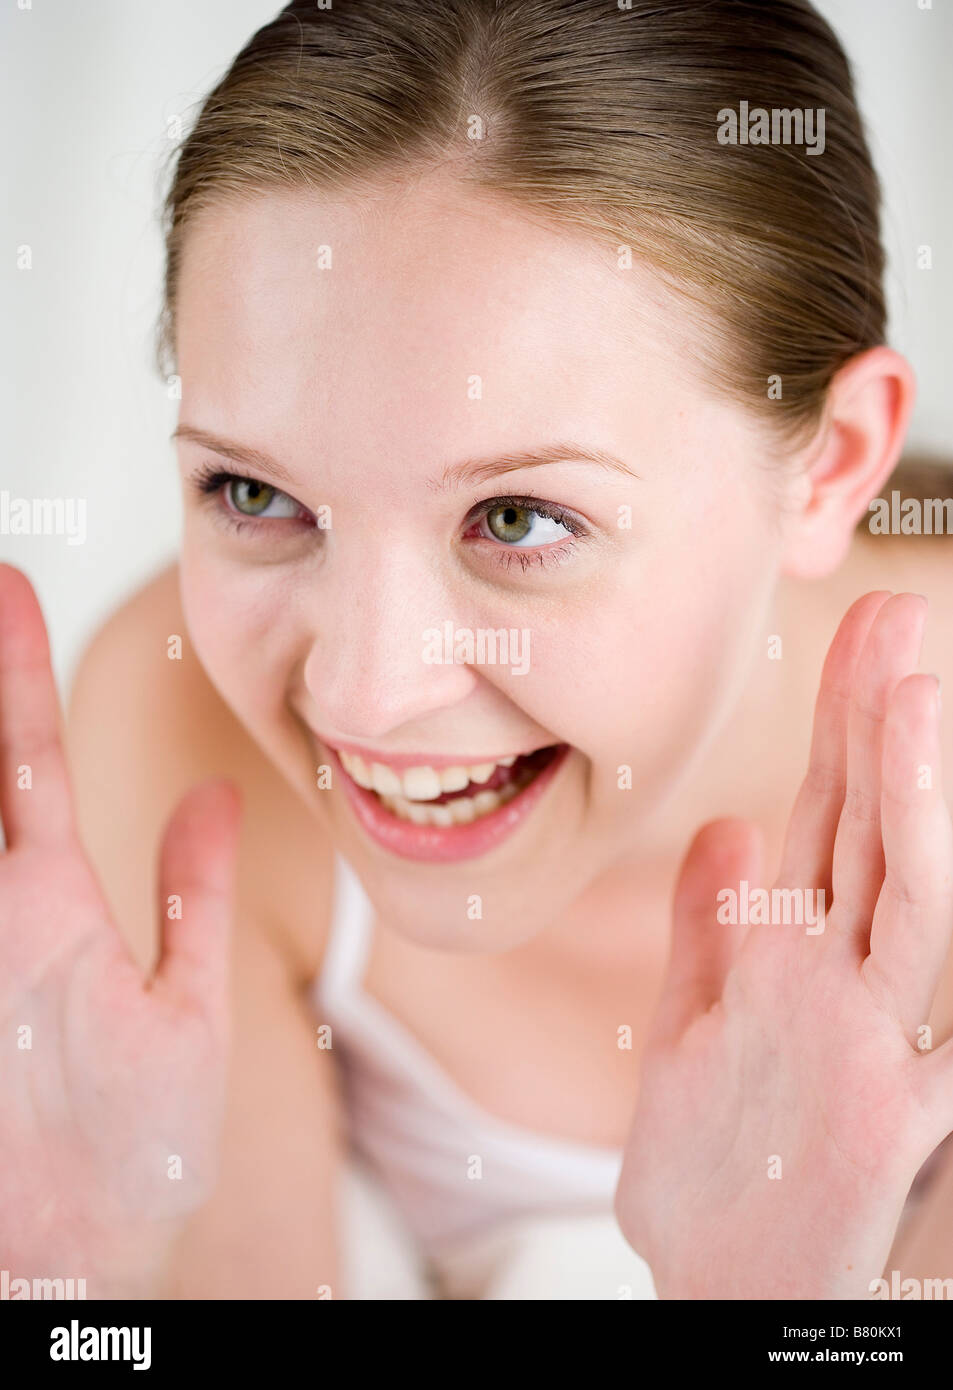 Young woman laughing close up Stock Photo